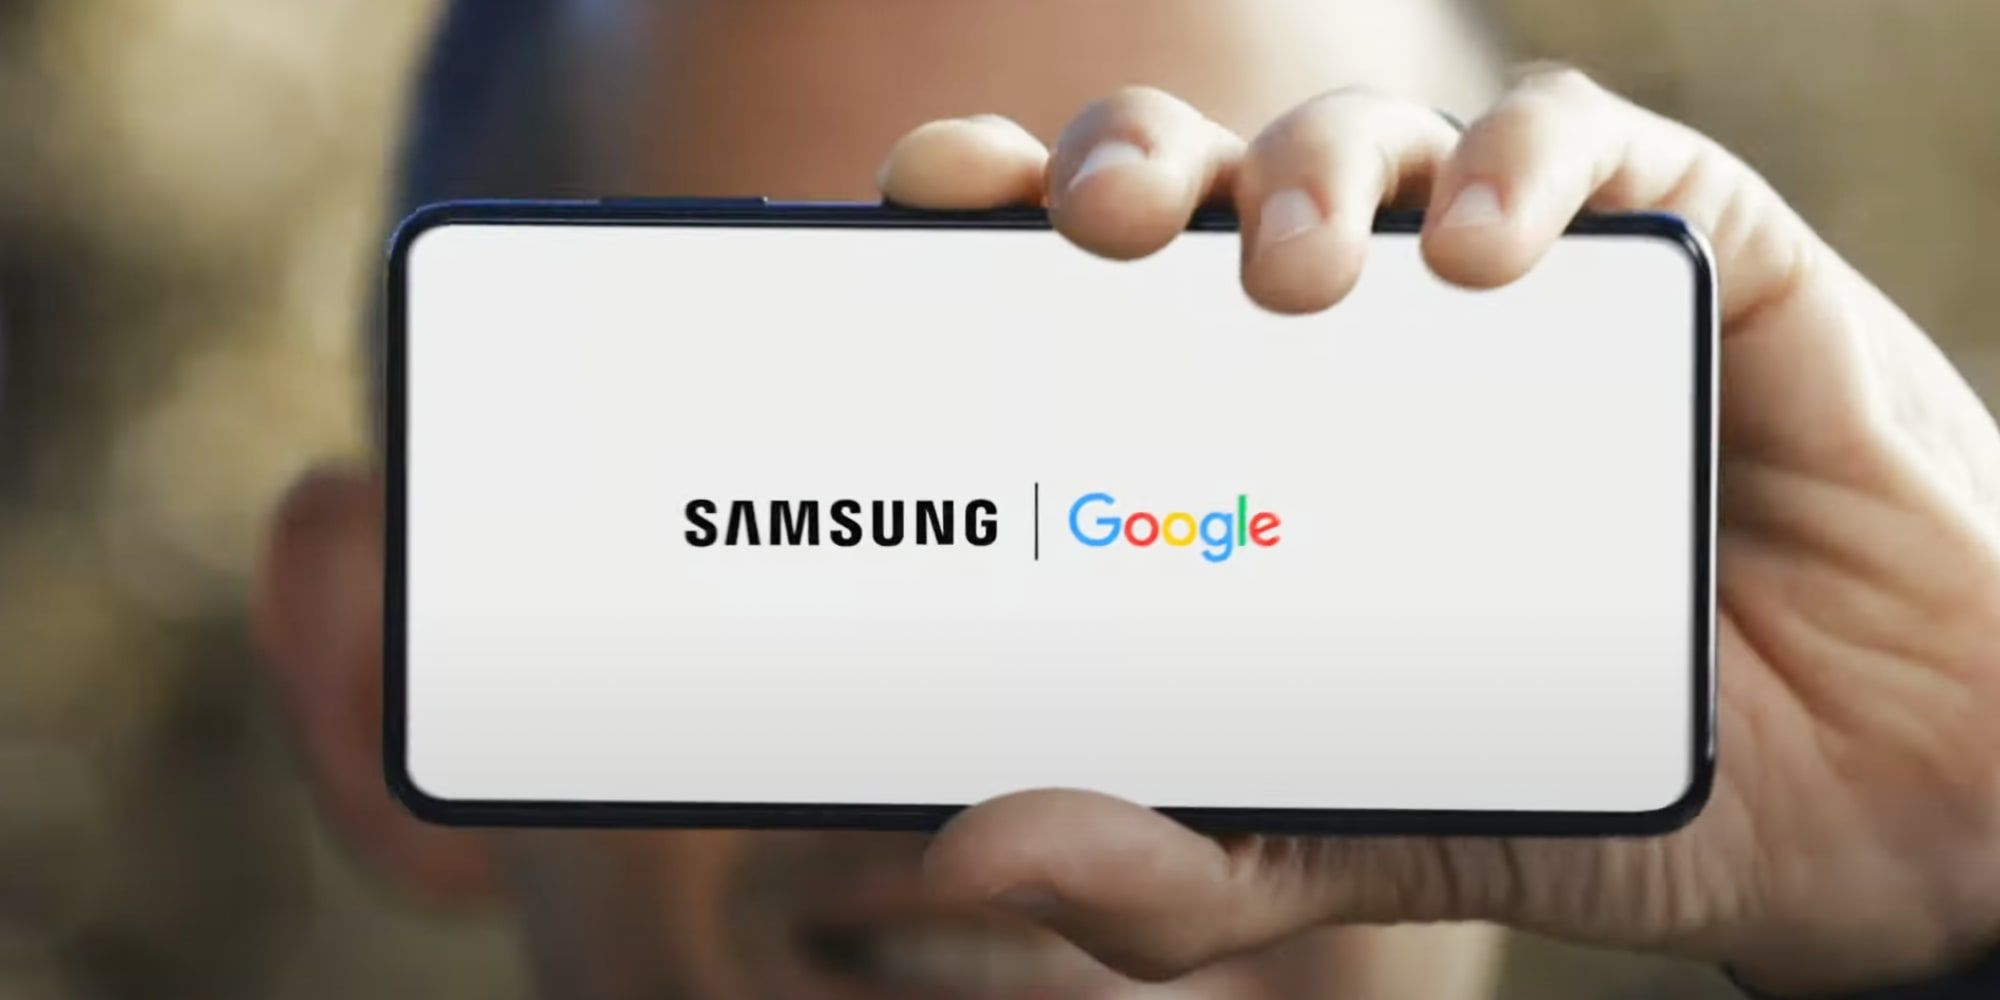 Samsung and Google logos on a smartphone